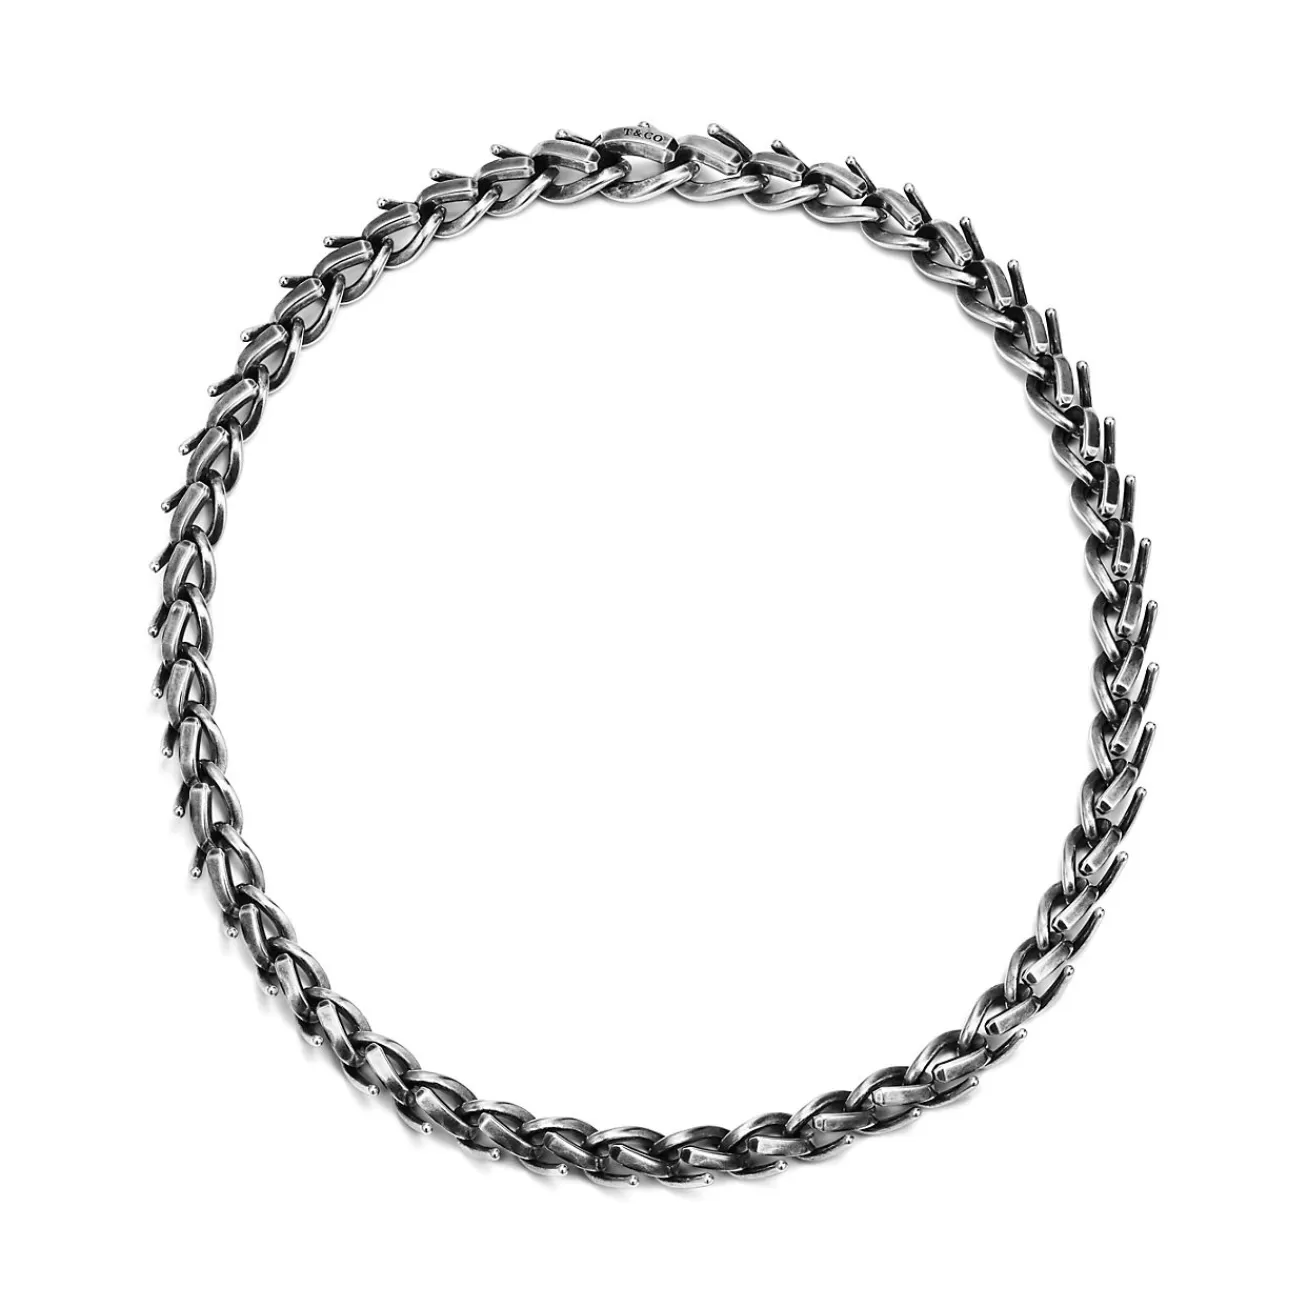 Tiffany & Co. Tiffany Forge Medium Link Necklace in Blackened Sterling Silver | ^ Necklaces & Pendants | Men's Jewelry